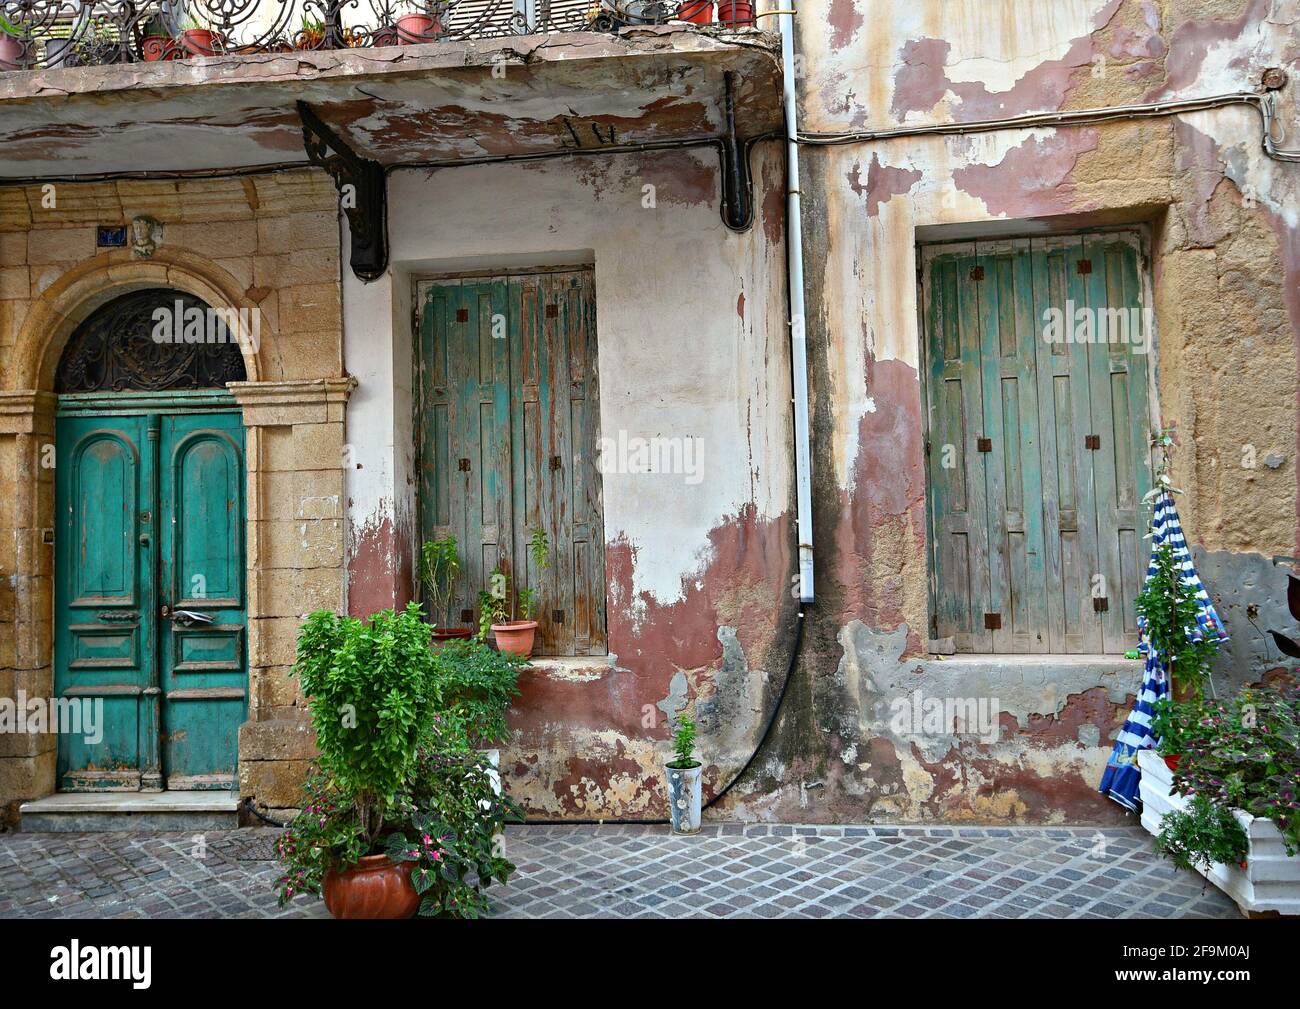 Old abandoned rural house facade with a faded wall and weathered wooden door and shutters in Chania, Crete island Greece. Stock Photo